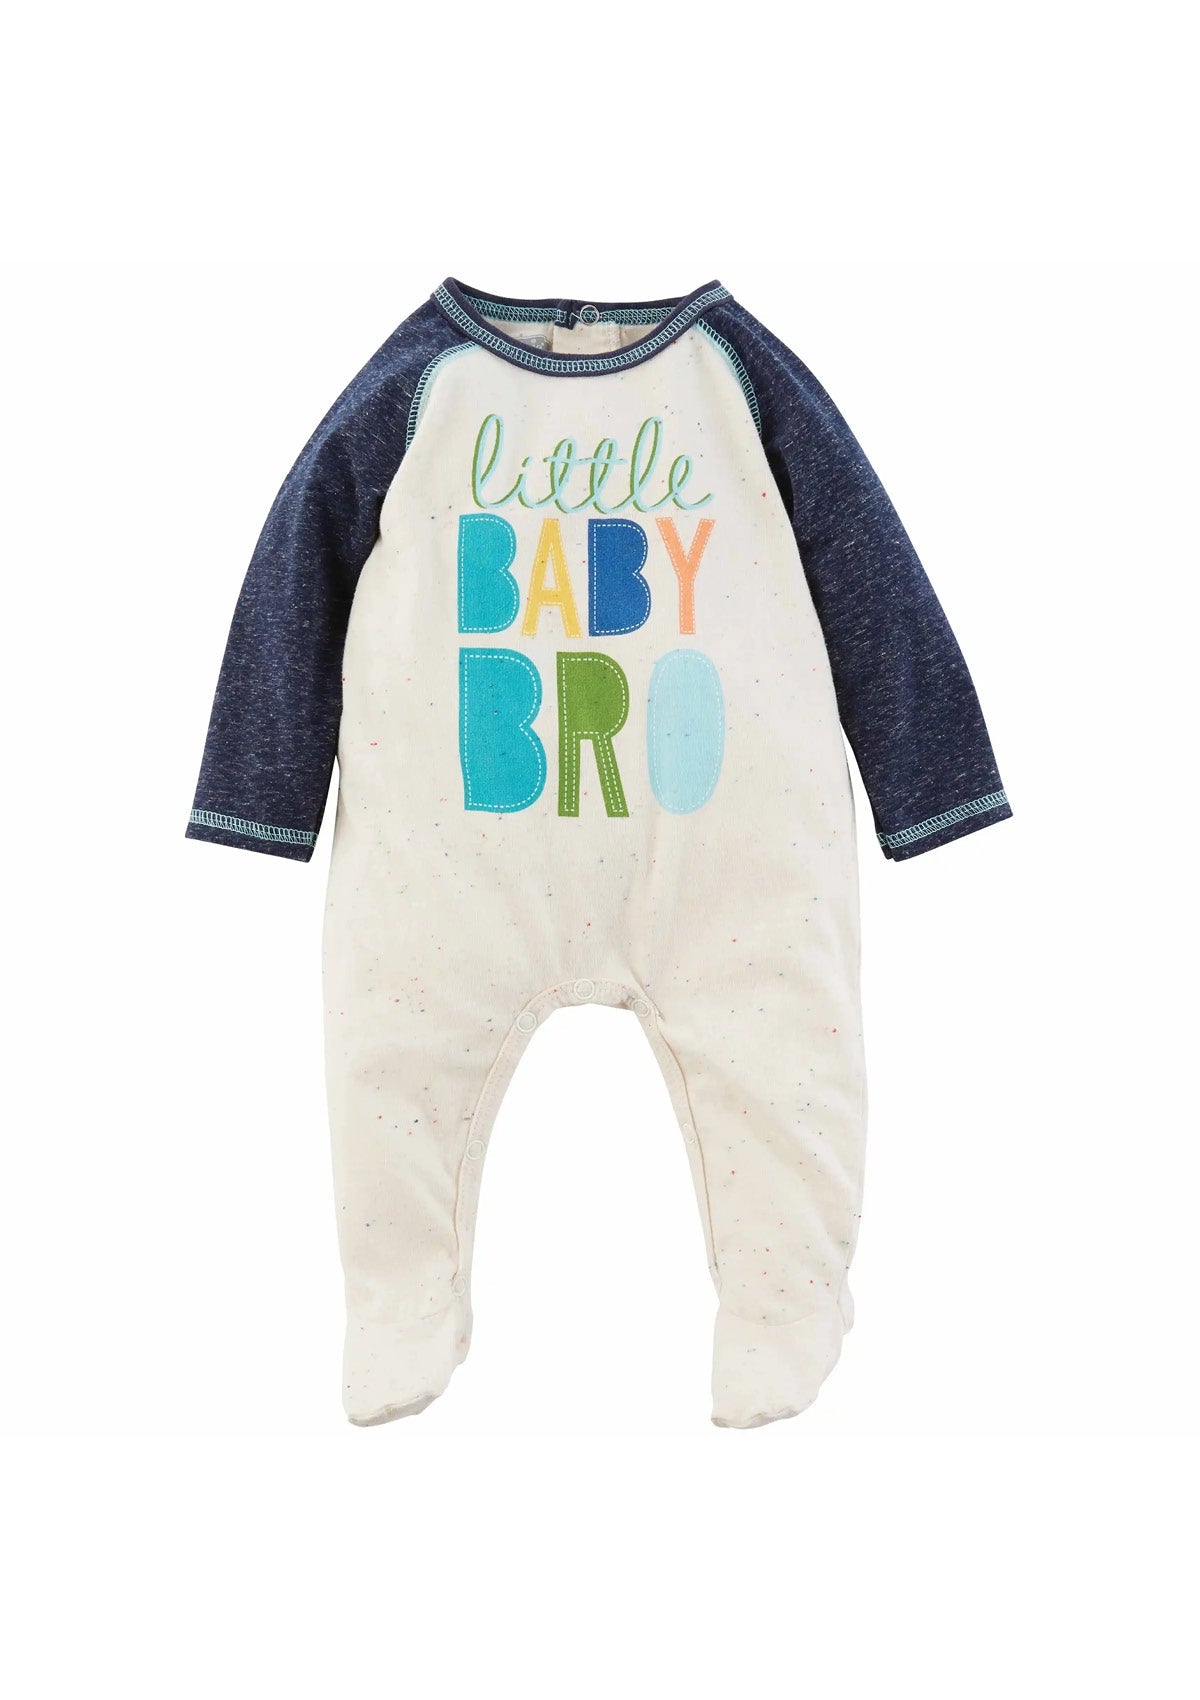 Baby-Clothing for the Littles-For the Littles-Ruby Jane.